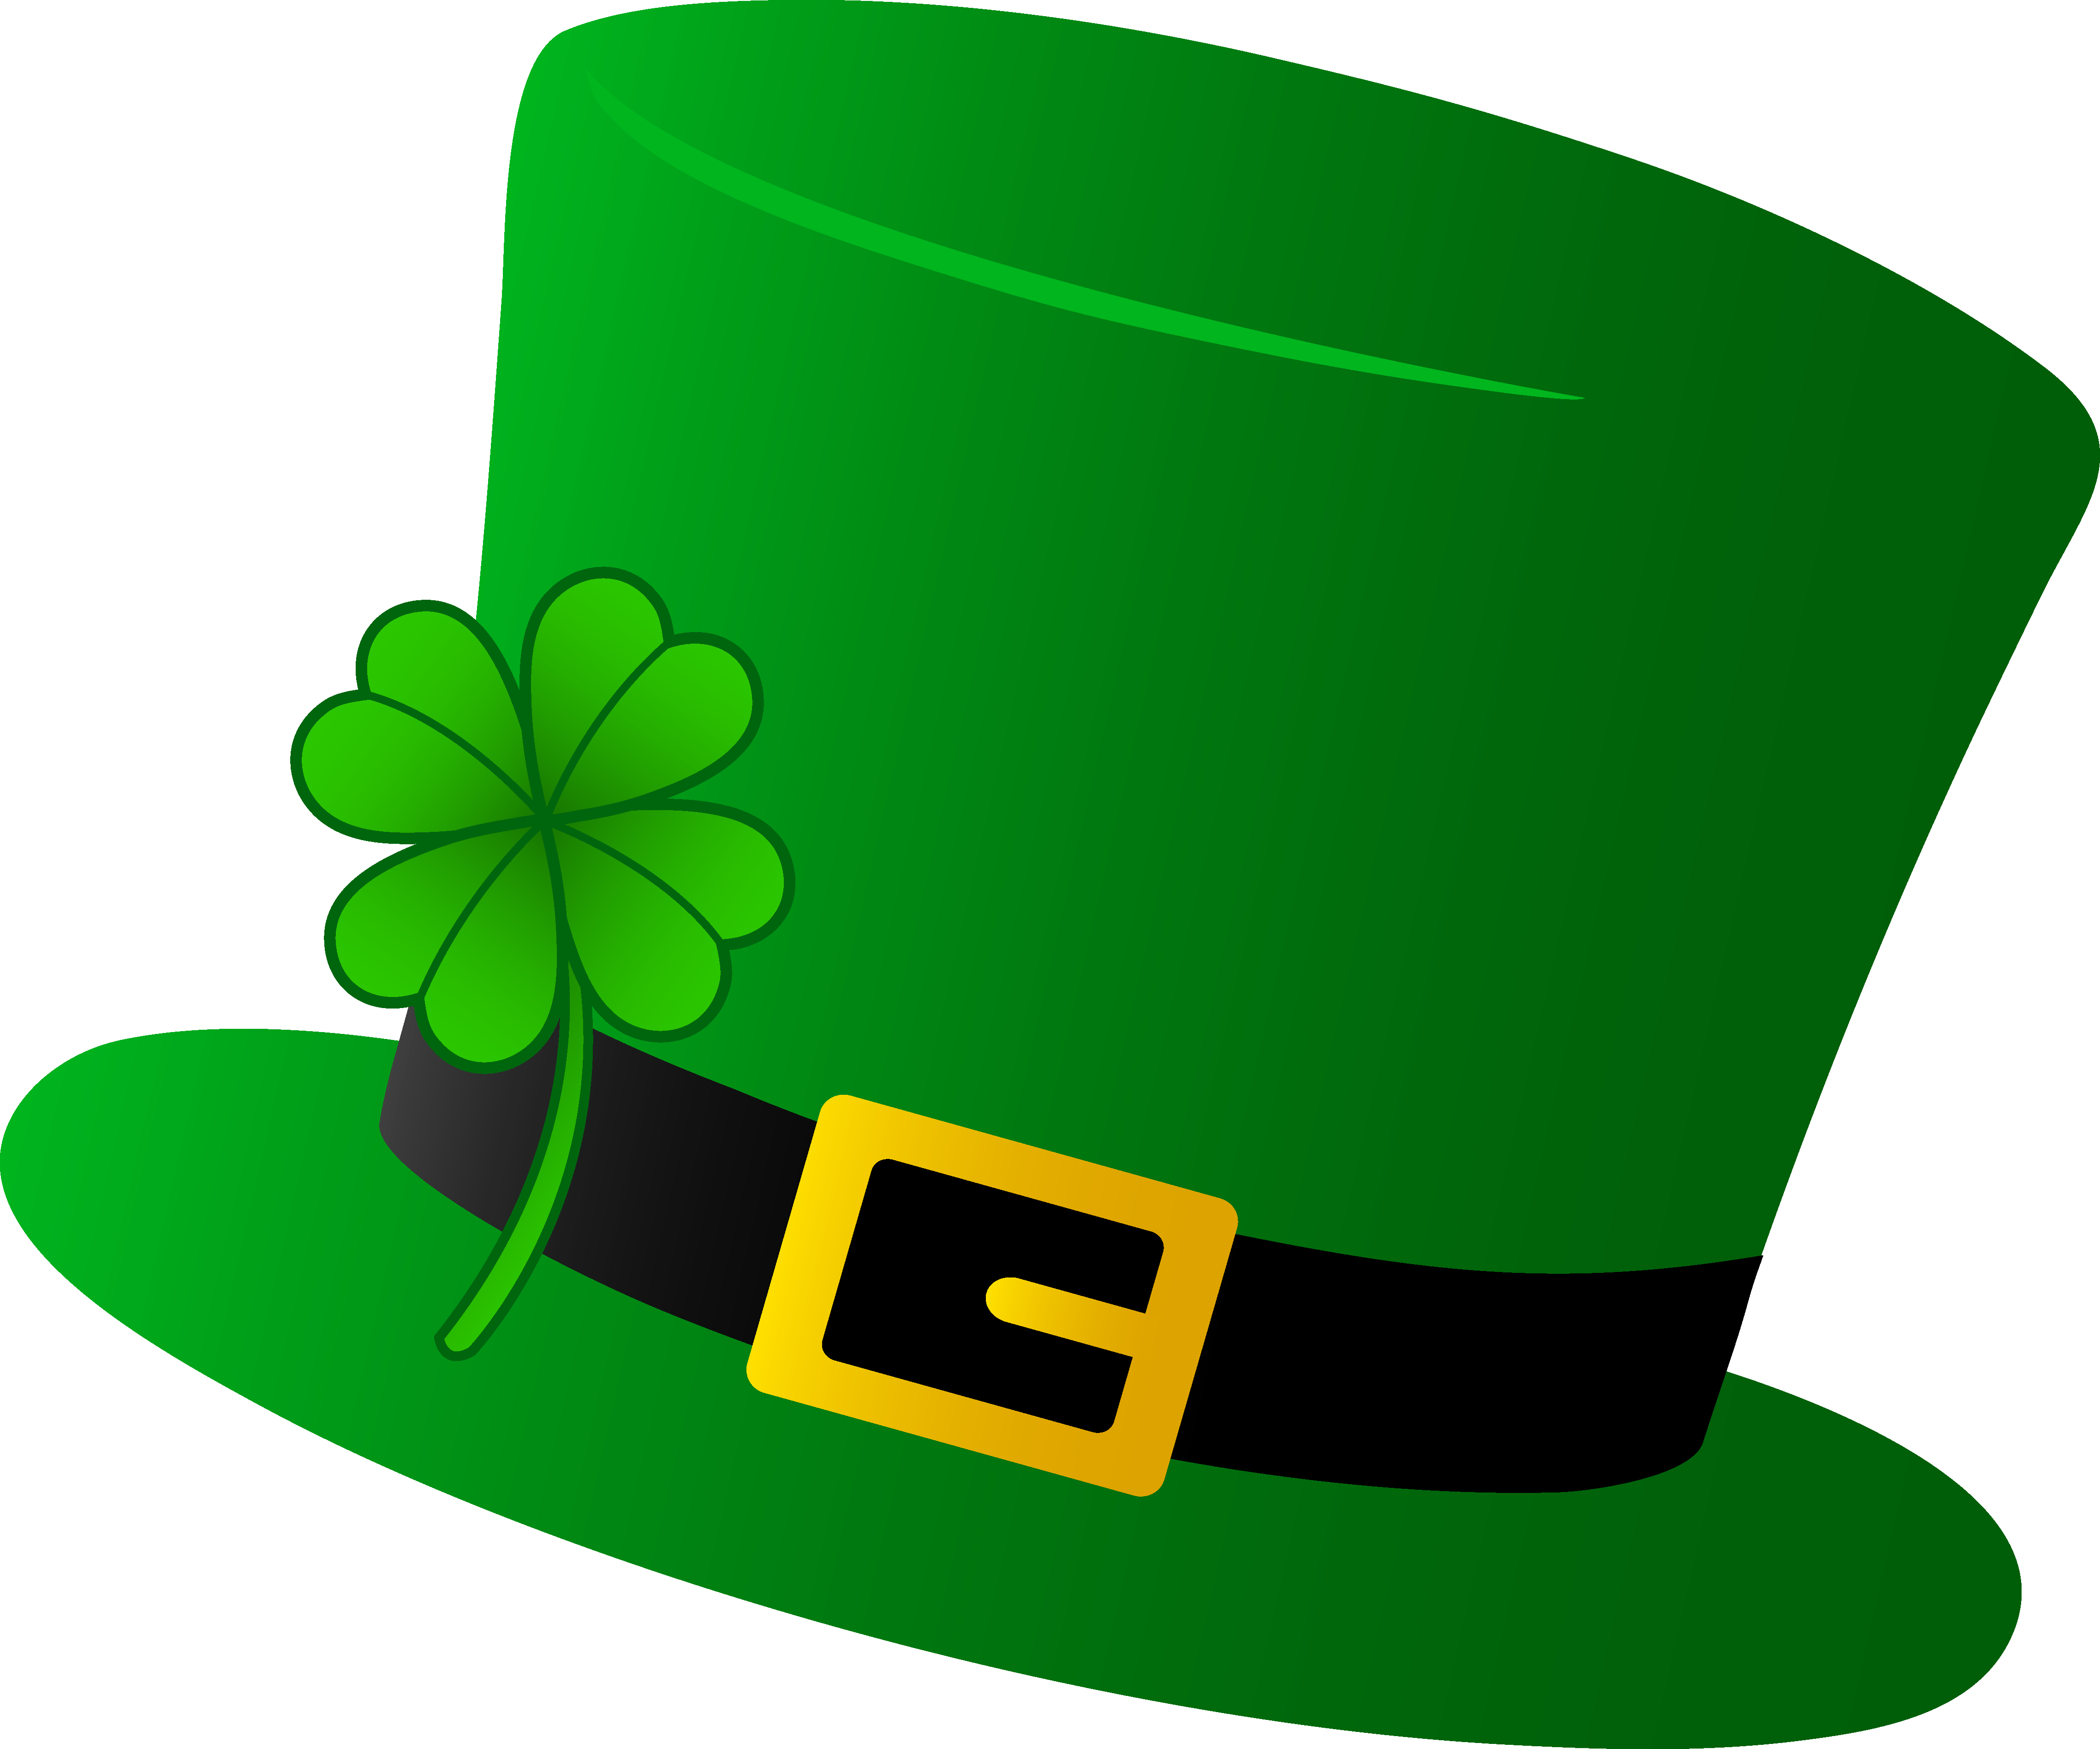 st-patrick-s-day-hat-drawing-free-image-download